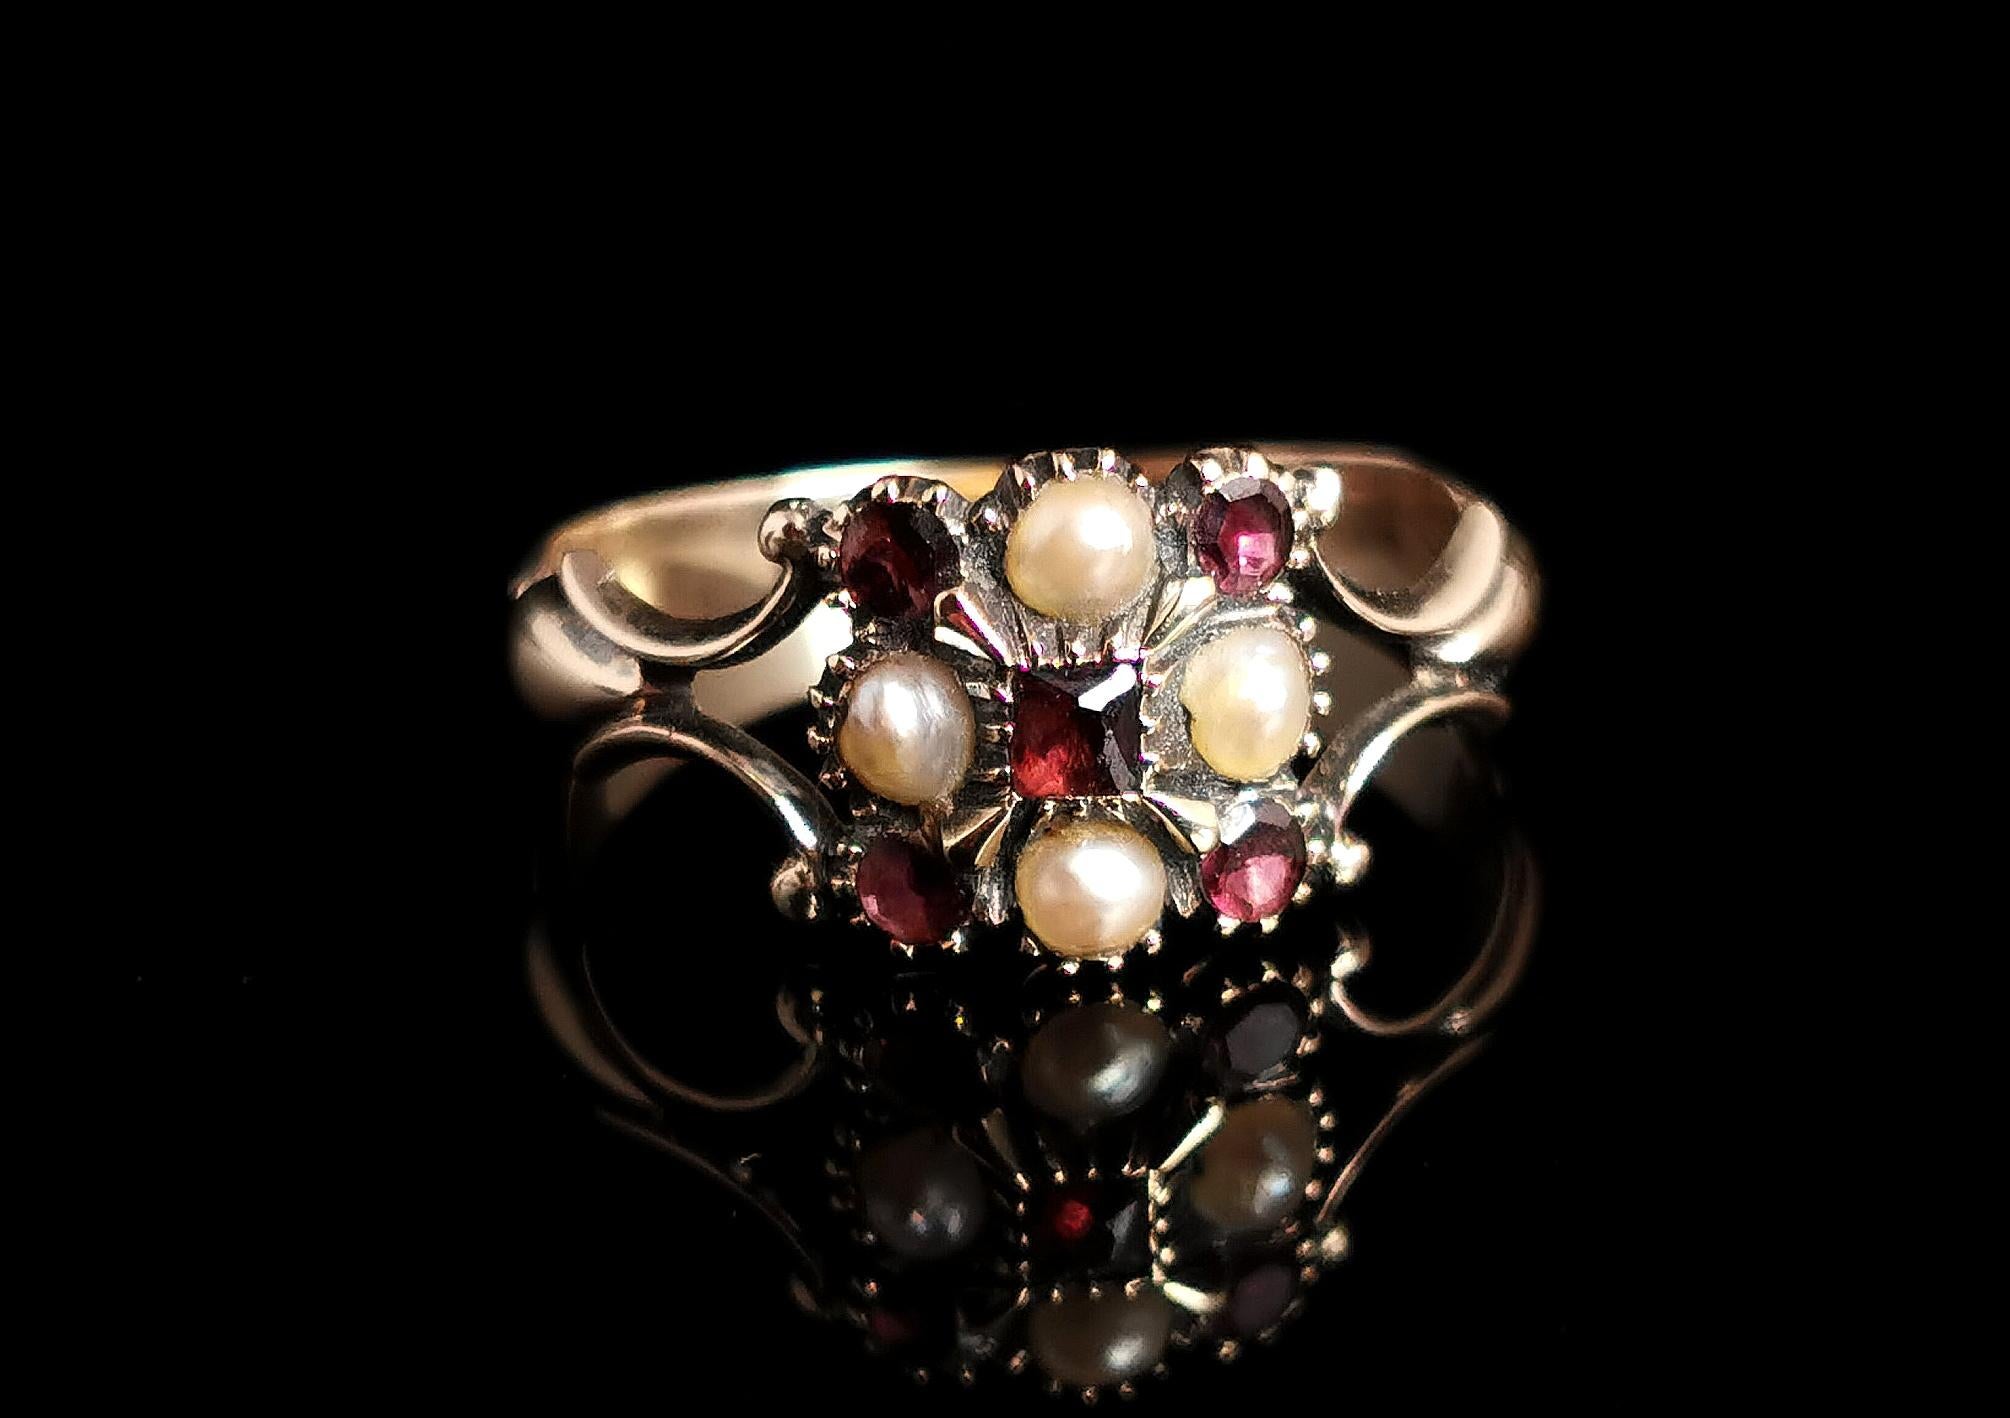 A beautiful antique Regency era ring.

This pretty piece features a central floral arrangement of garnet and seed pearl, set out in an almost chequer board design, the stones set in sterling silver.

The ring has decorative split shoulders with an